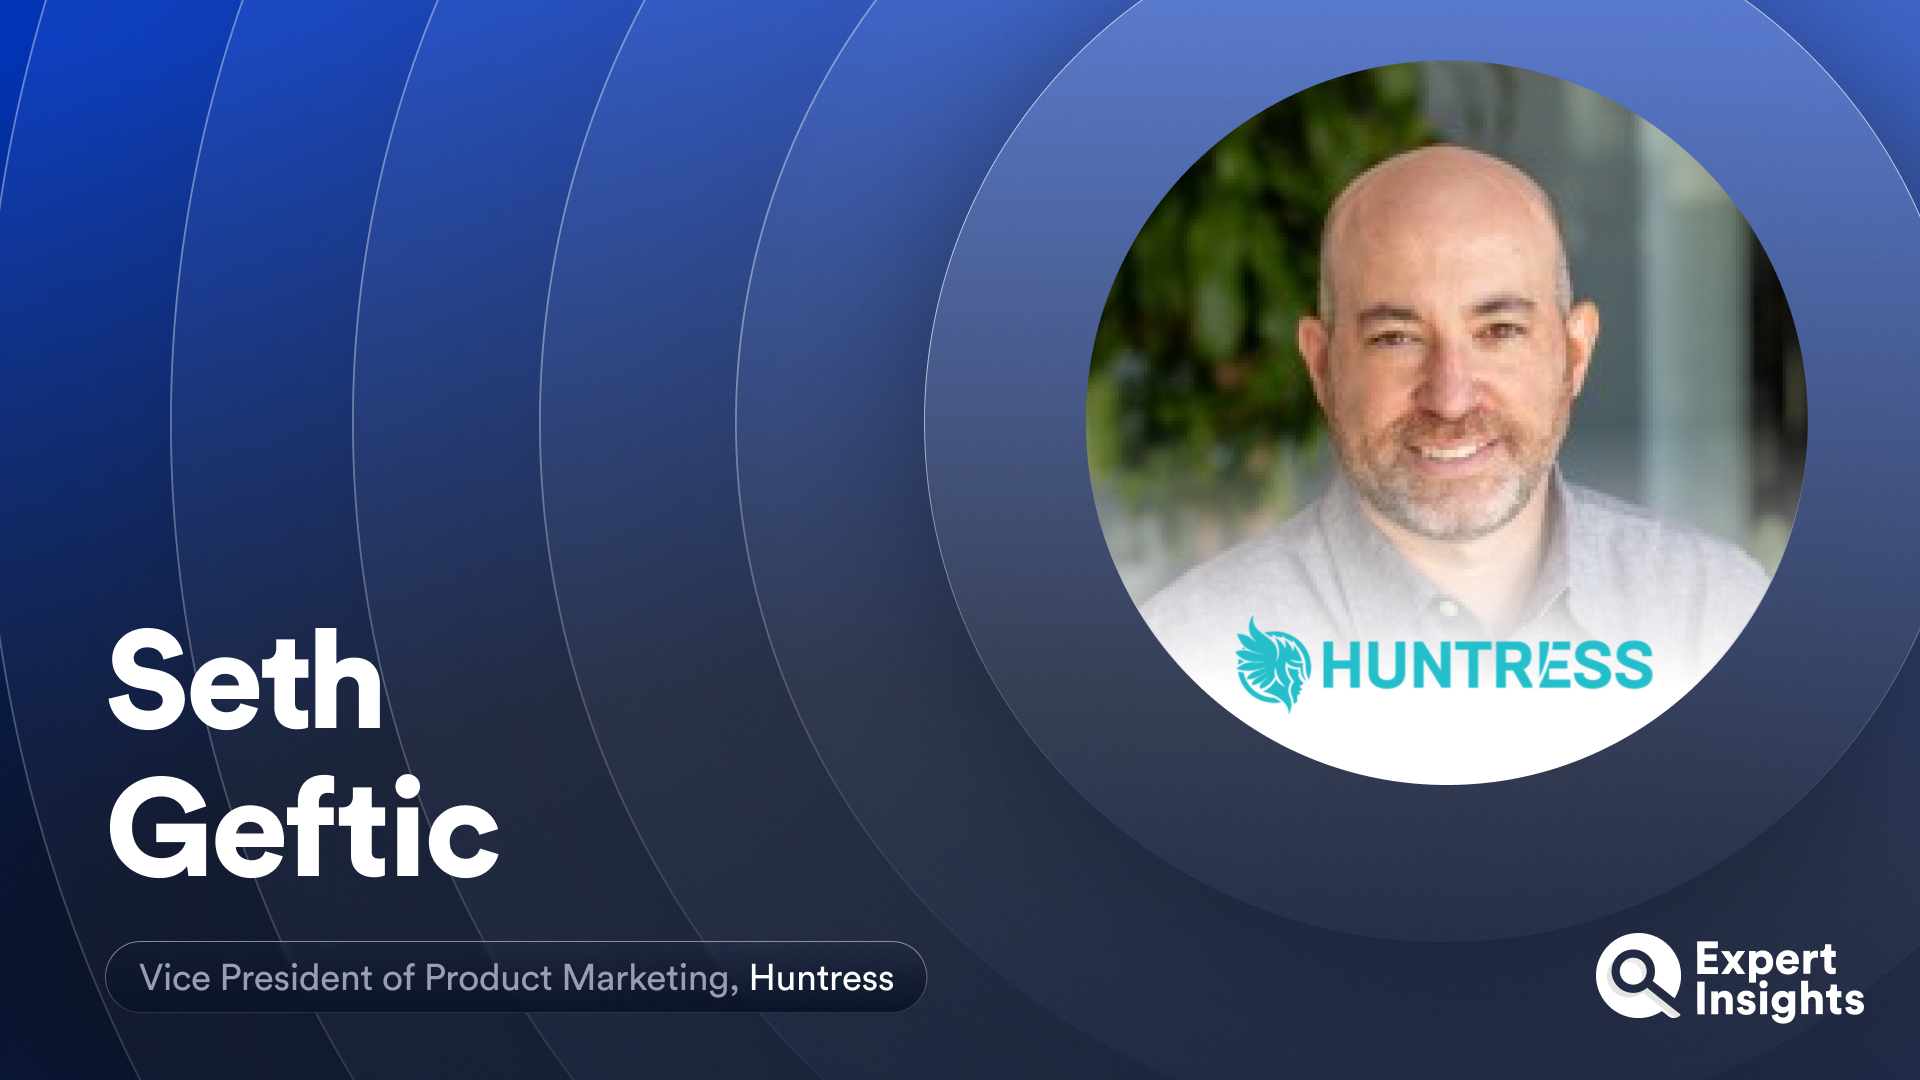 Expert Insights Interview with Seth Geftic of Huntress